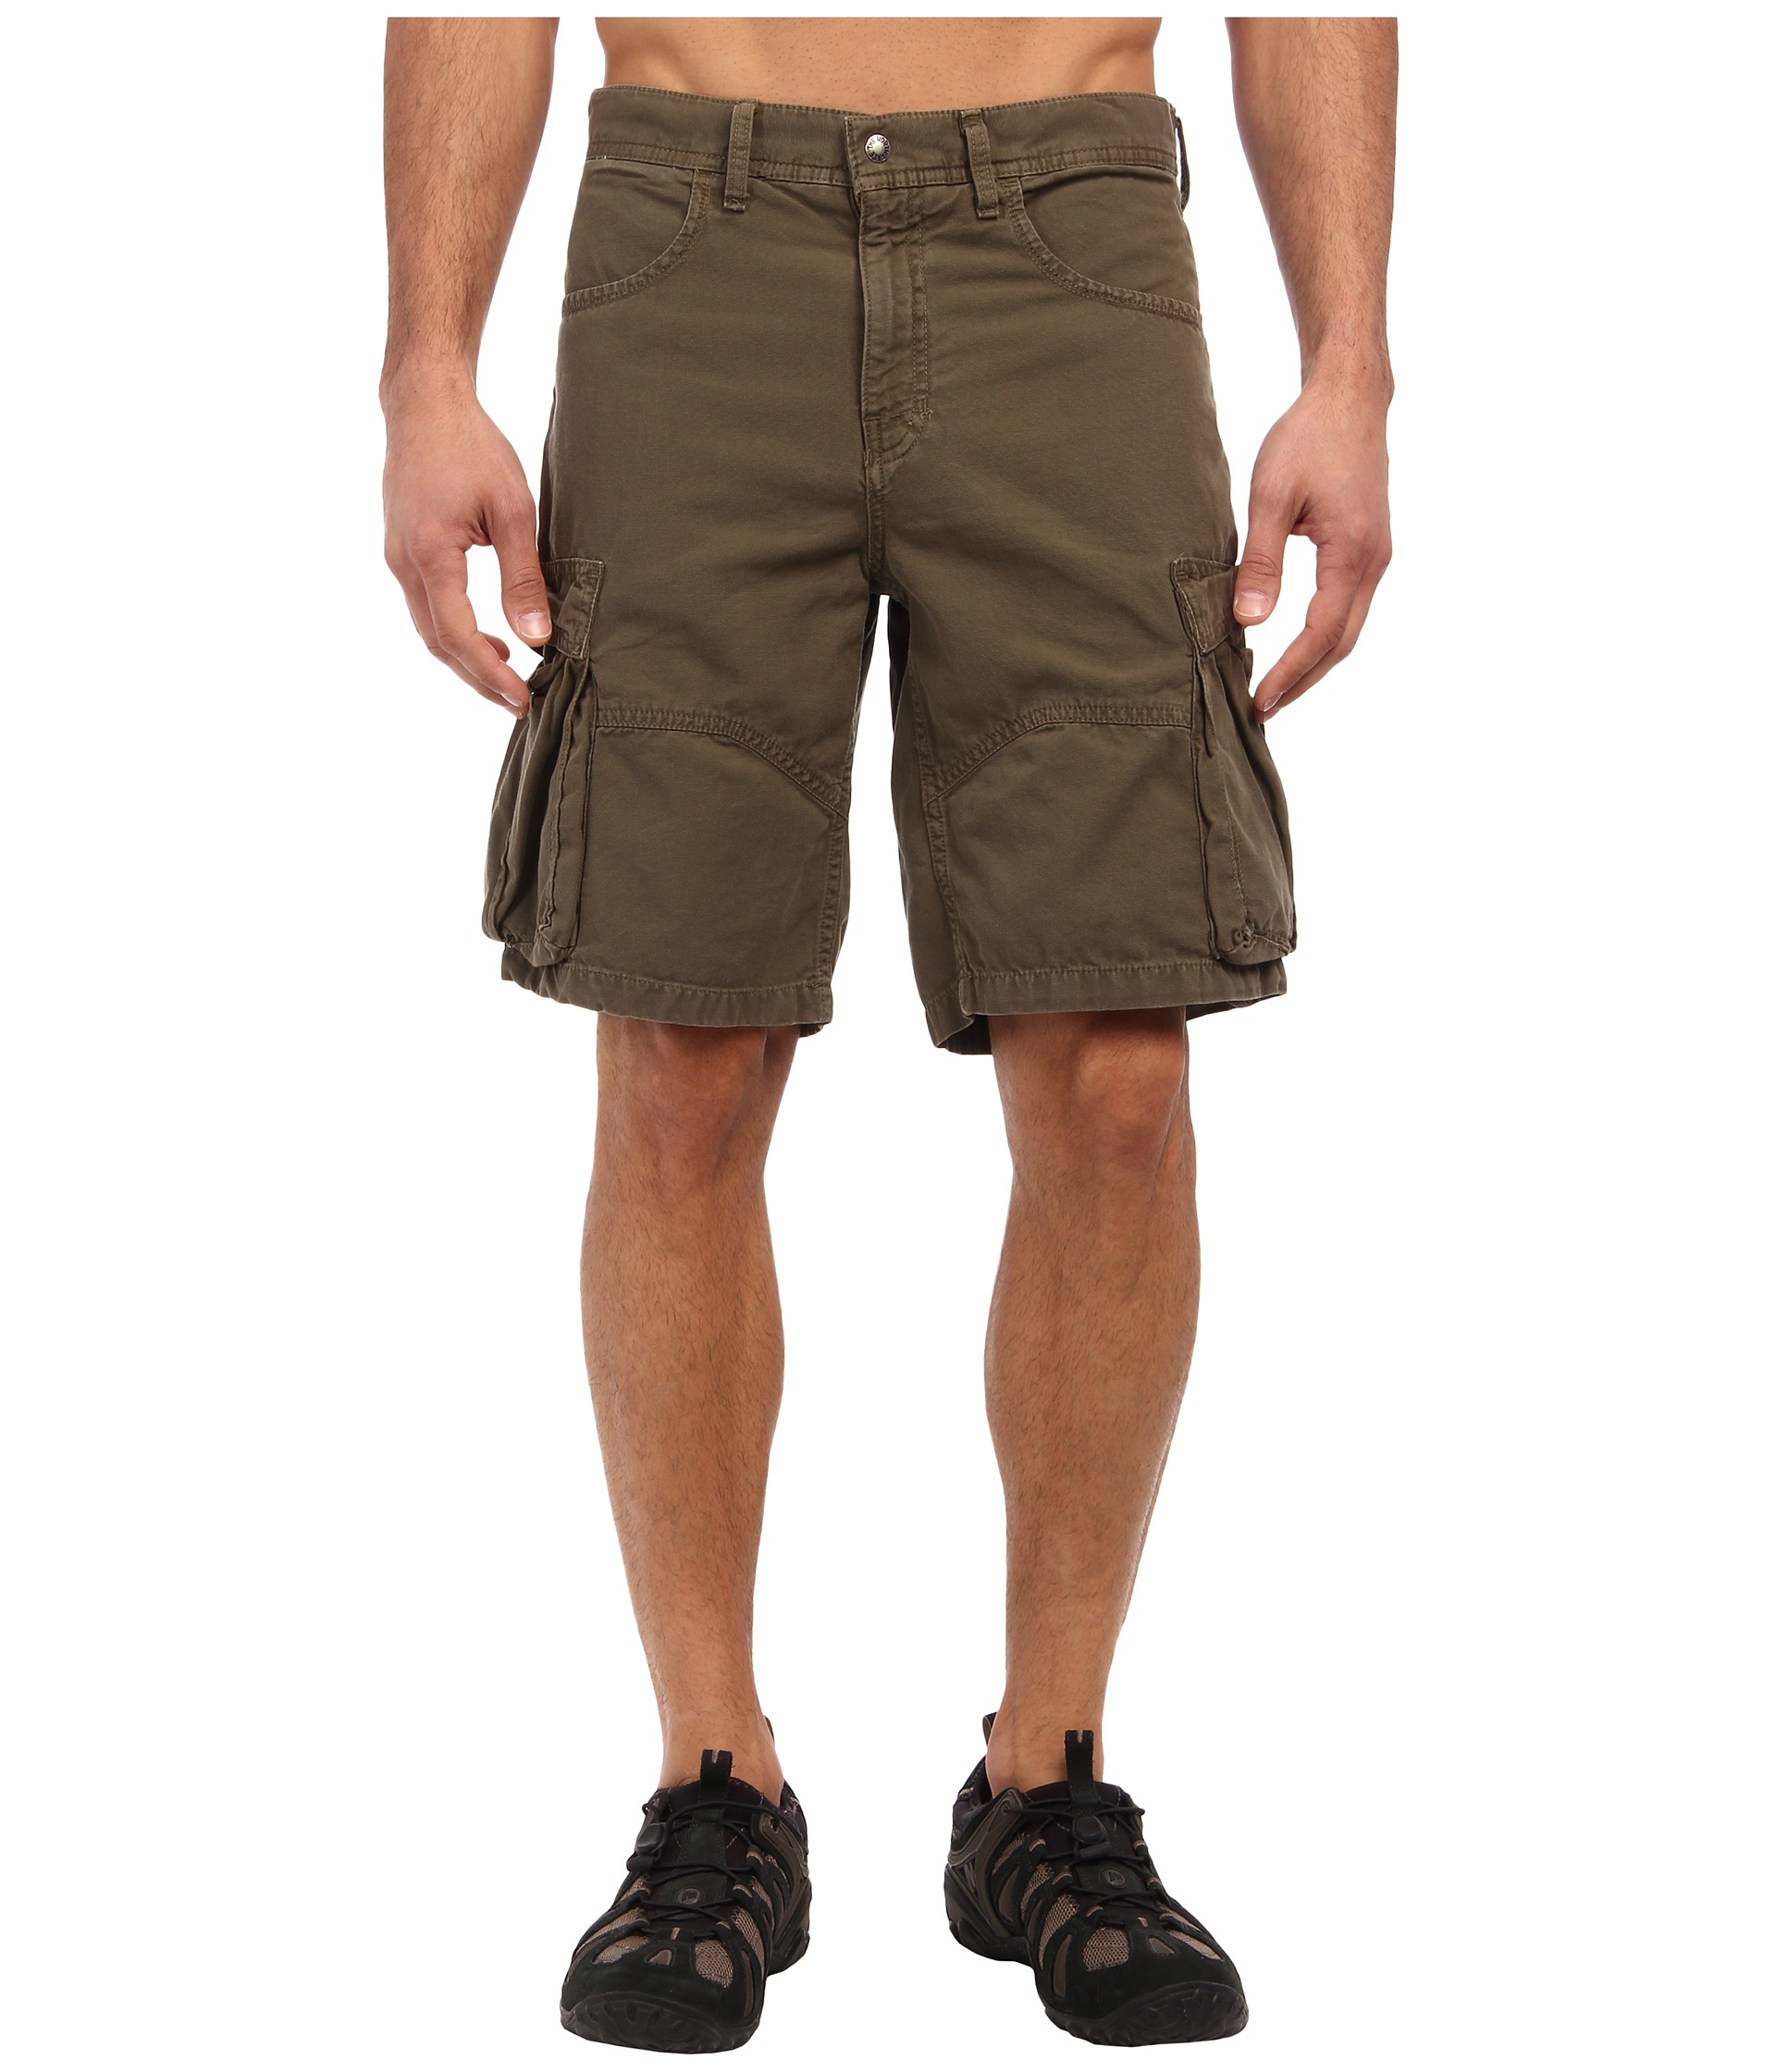 Lyst - The North Face Acadia Cargo Short in Green for Men